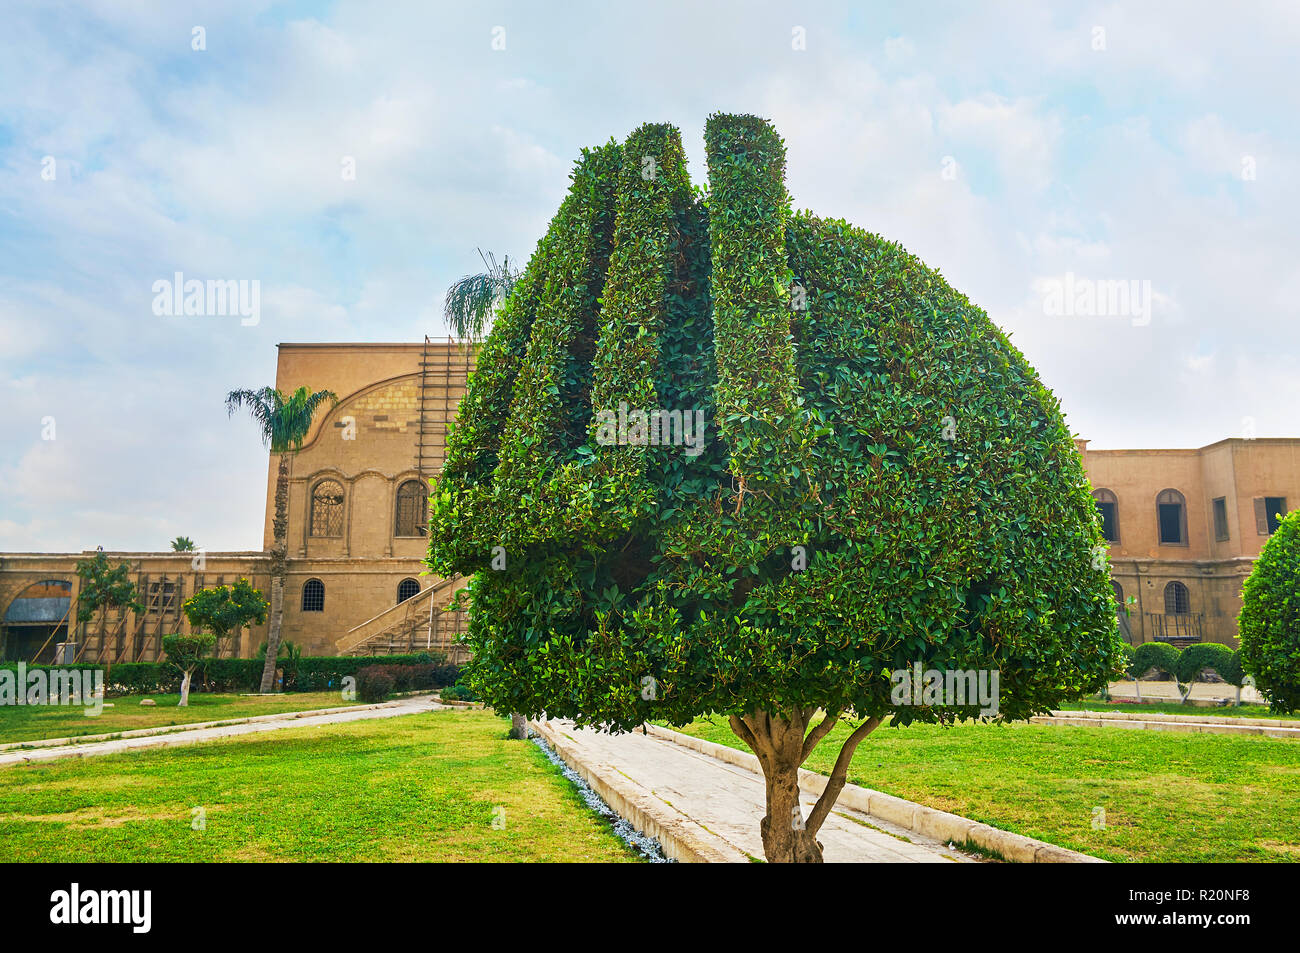 The ornamental garden of Saladin Citadel, with trimmed trees, decorated with Arabic inscription 'Allah', Cairo, Egypt. Stock Photo